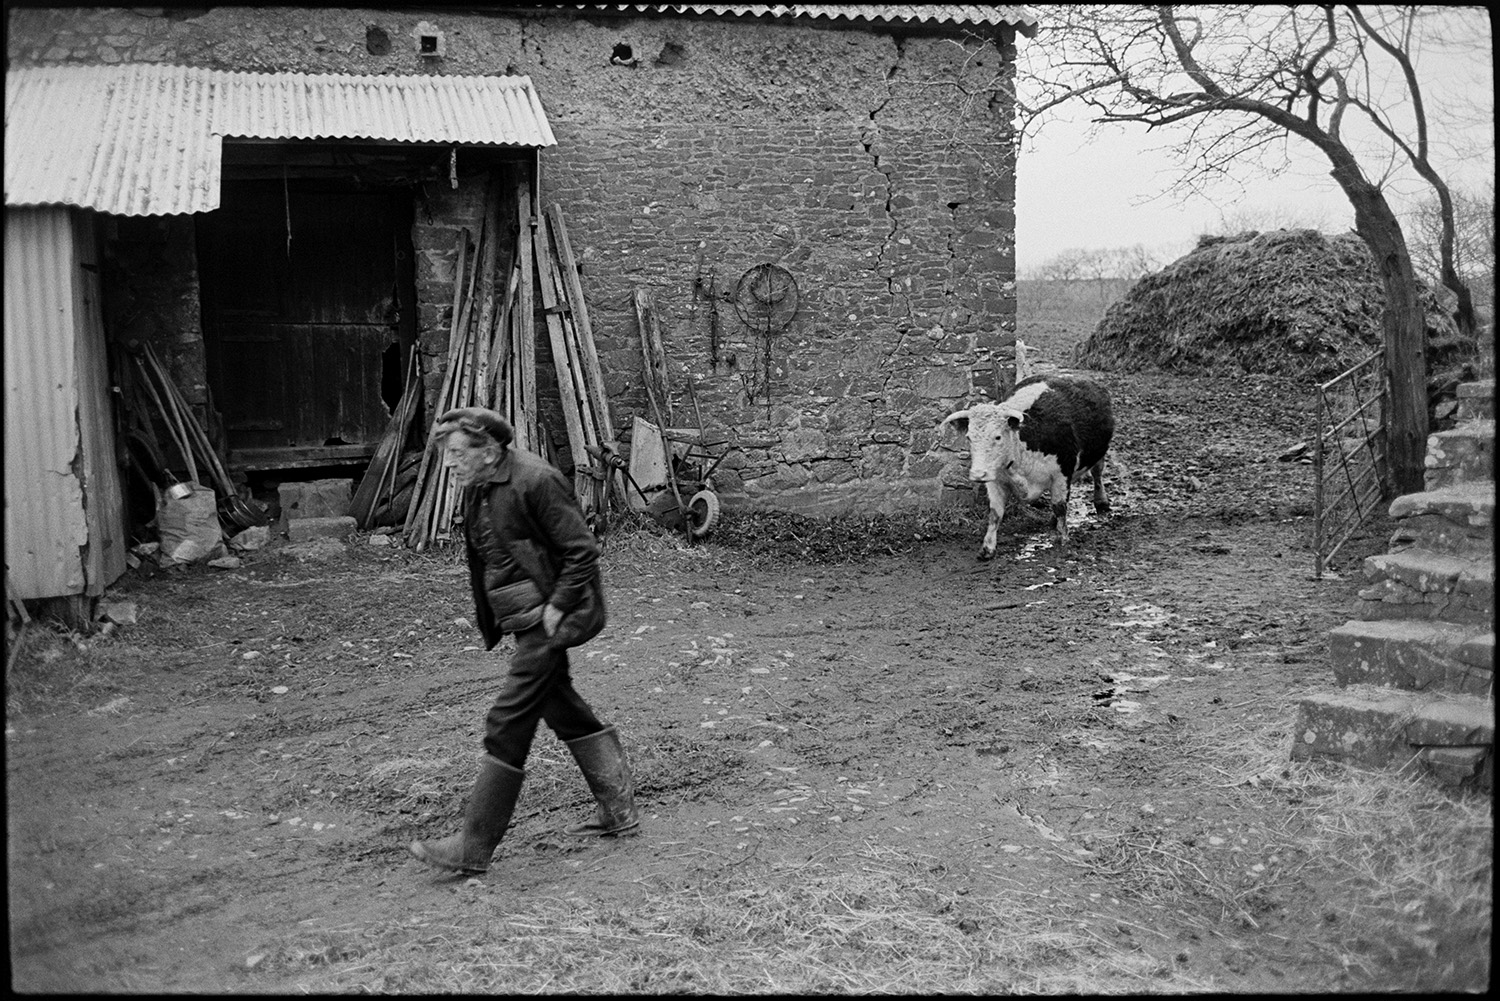 Farmyard, barn granary, farmer with cows and chickens. 
[Bill Cooke leading a cow through the muddy farmyard at Colehouse, Riddlecombe. They are passing a stone barn with a large crack in it and a corrugated iron lean-to with various farm implements. A dung heap can be seen in the background.]